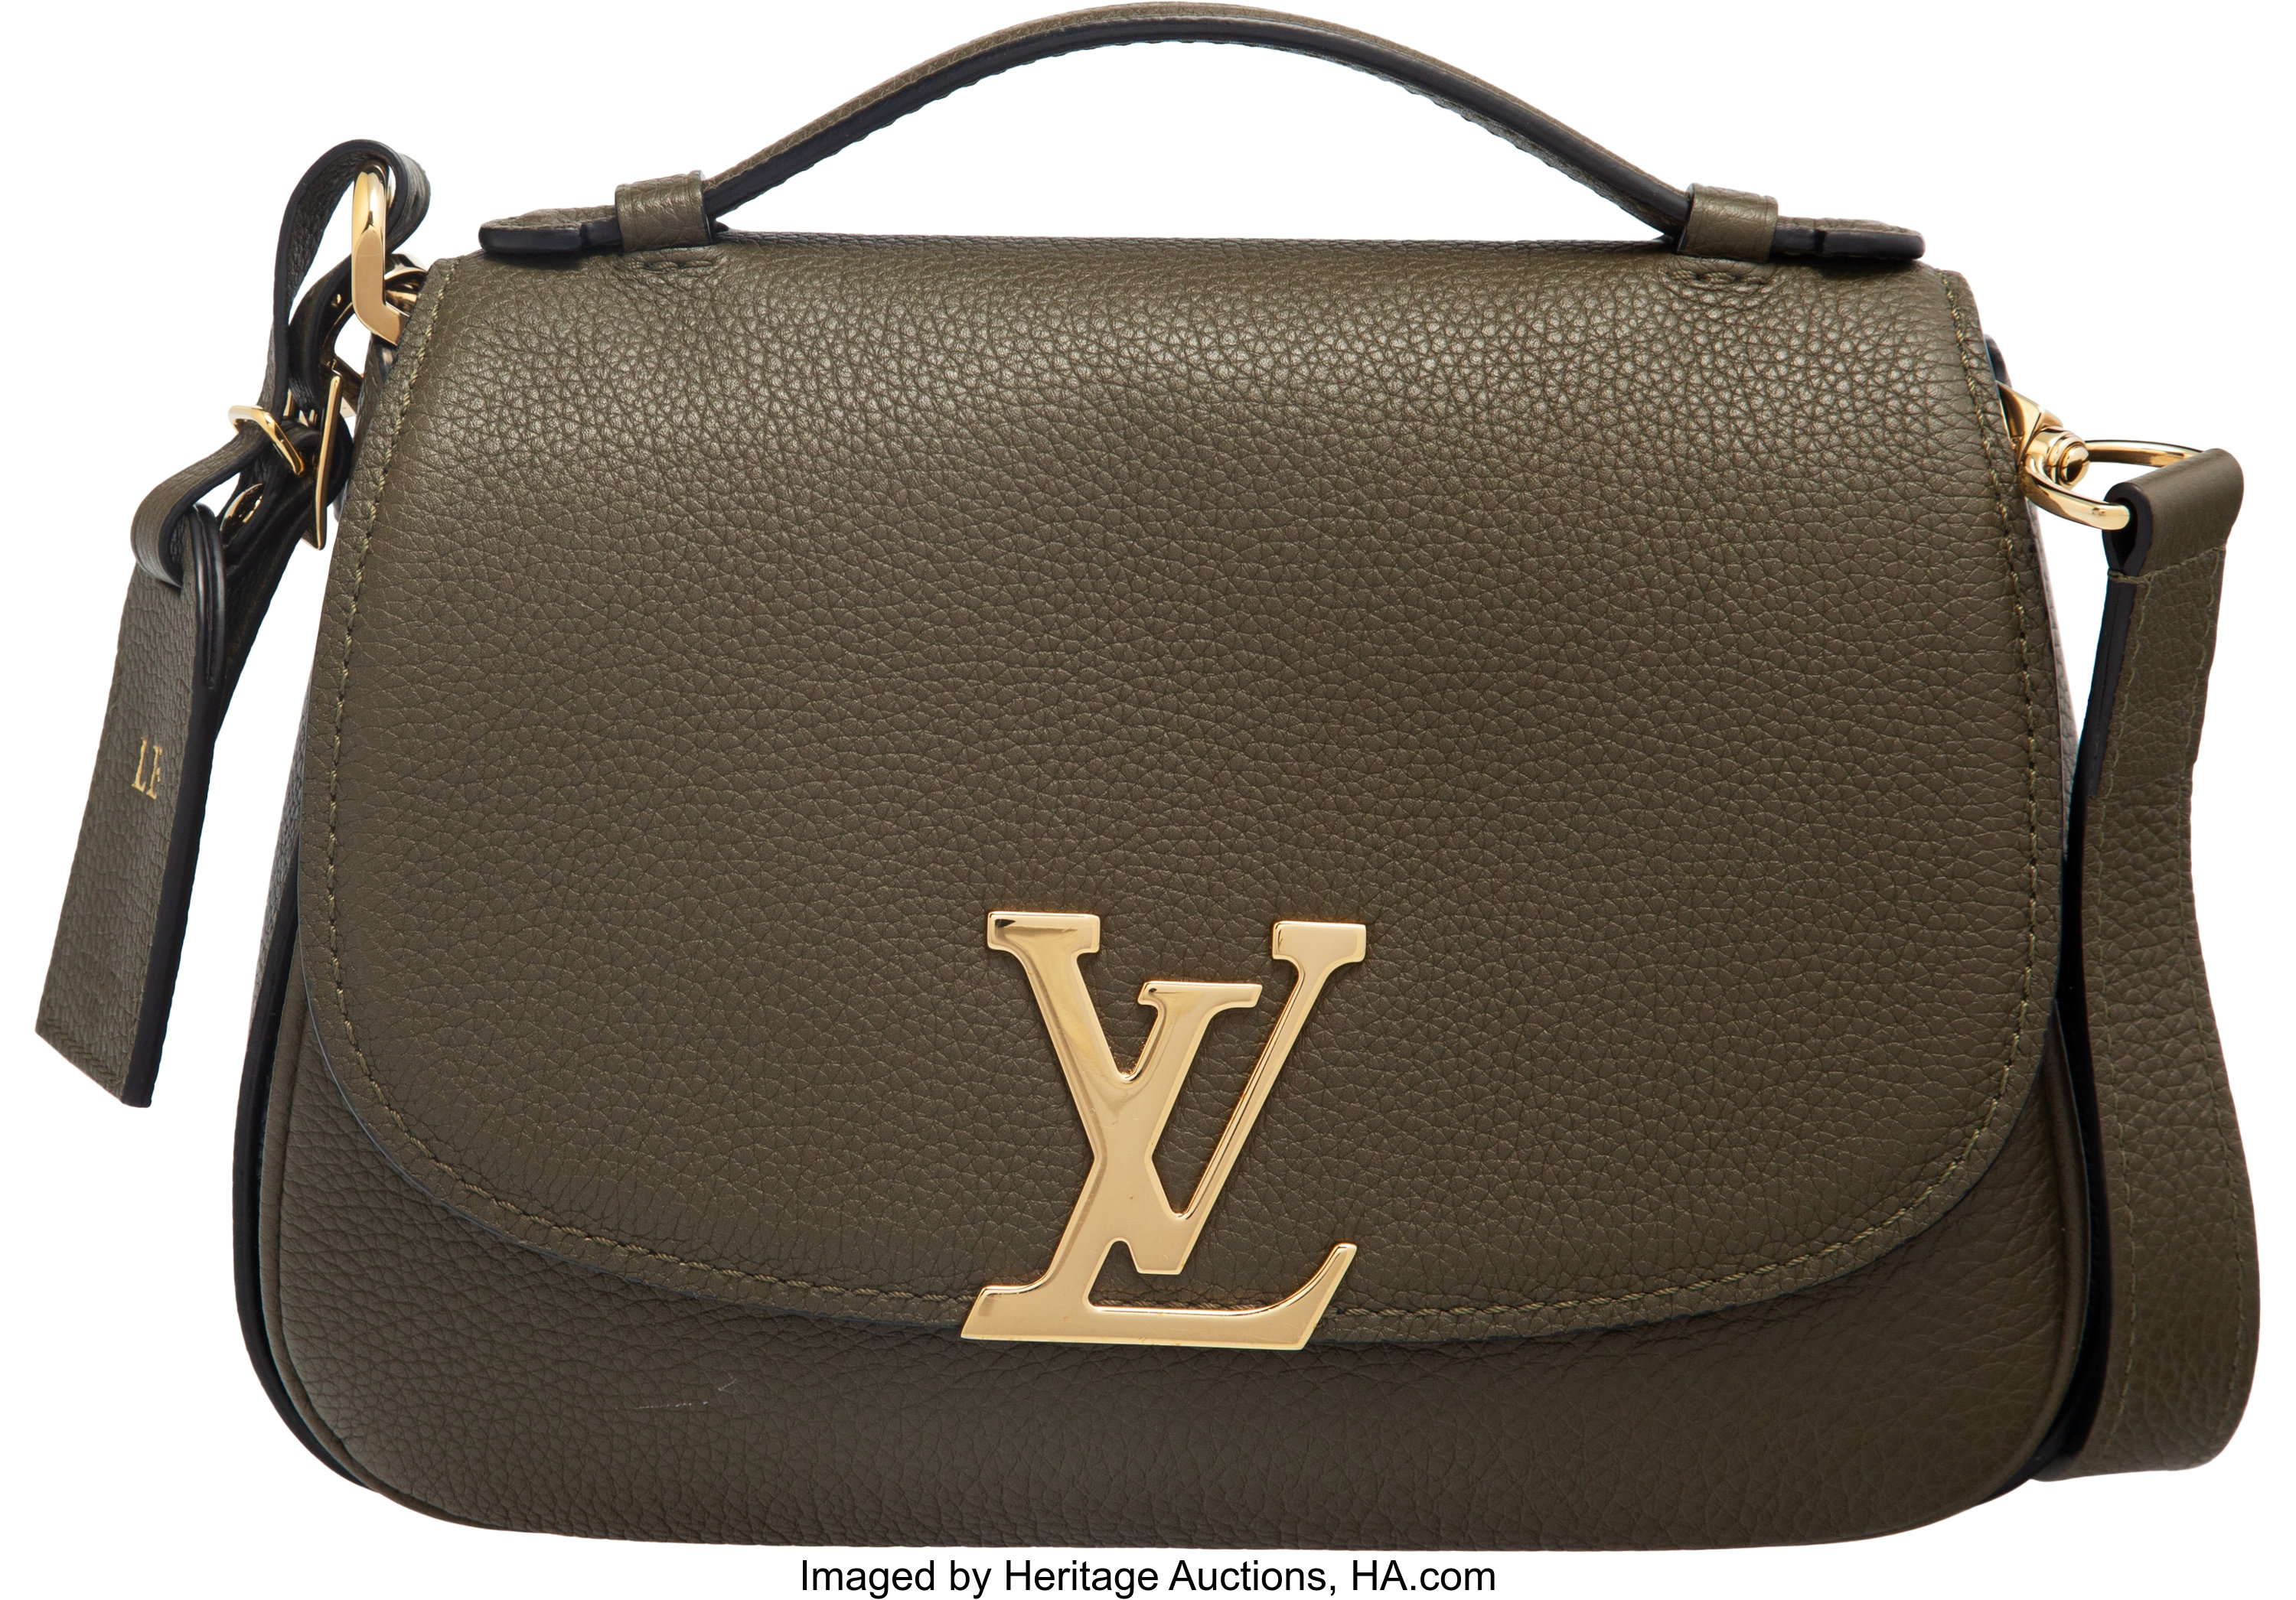 Louis Vuitton Olive Green Leather Vivienne Bag with Gold Hardware